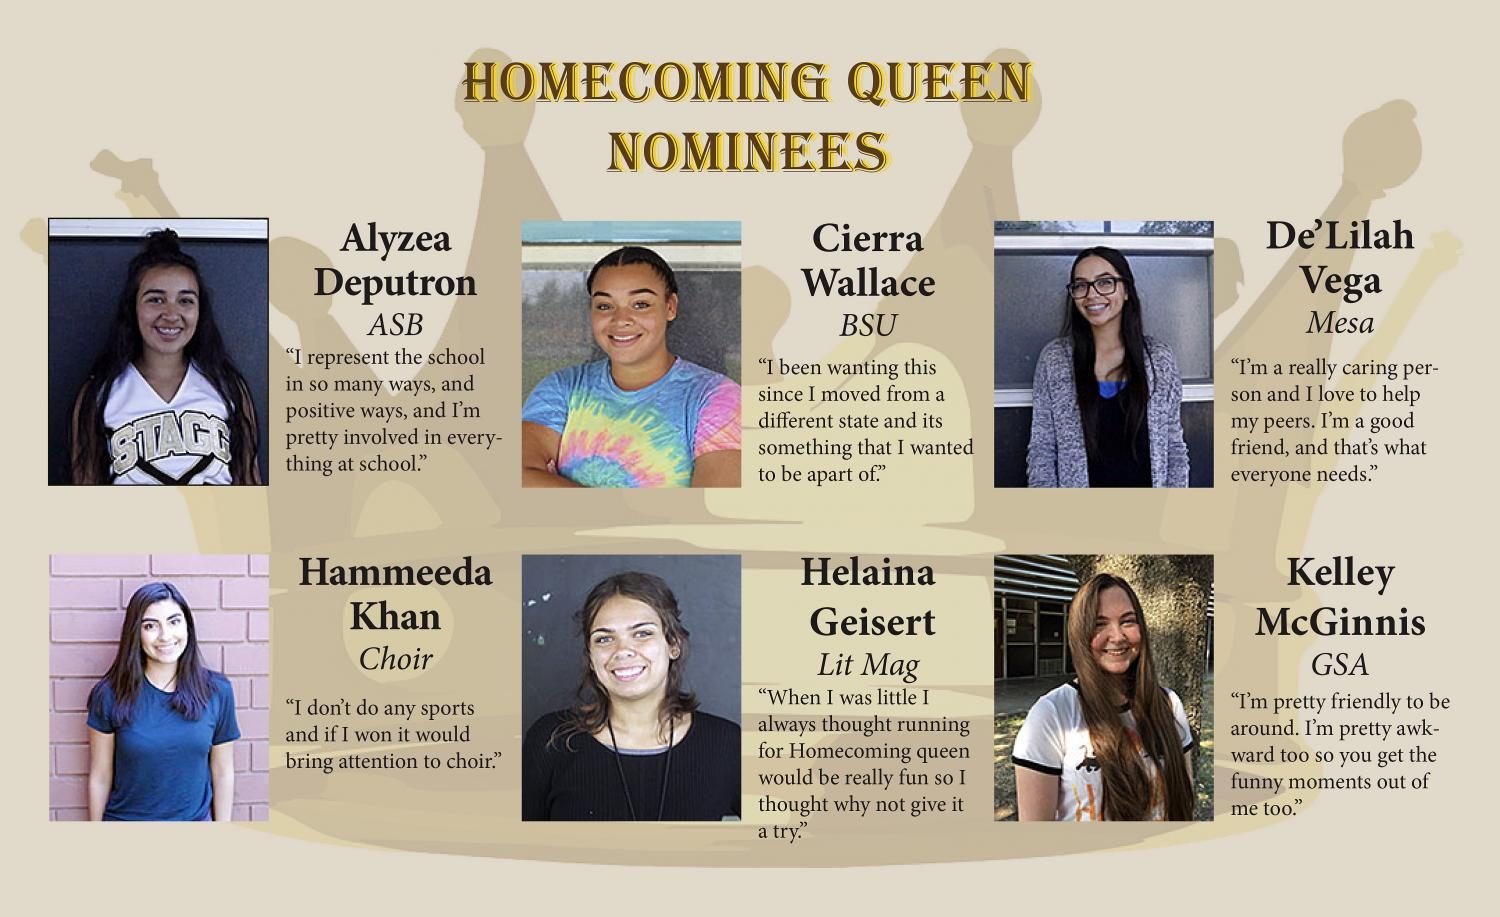 Homecoming Queen Nominees for 2017